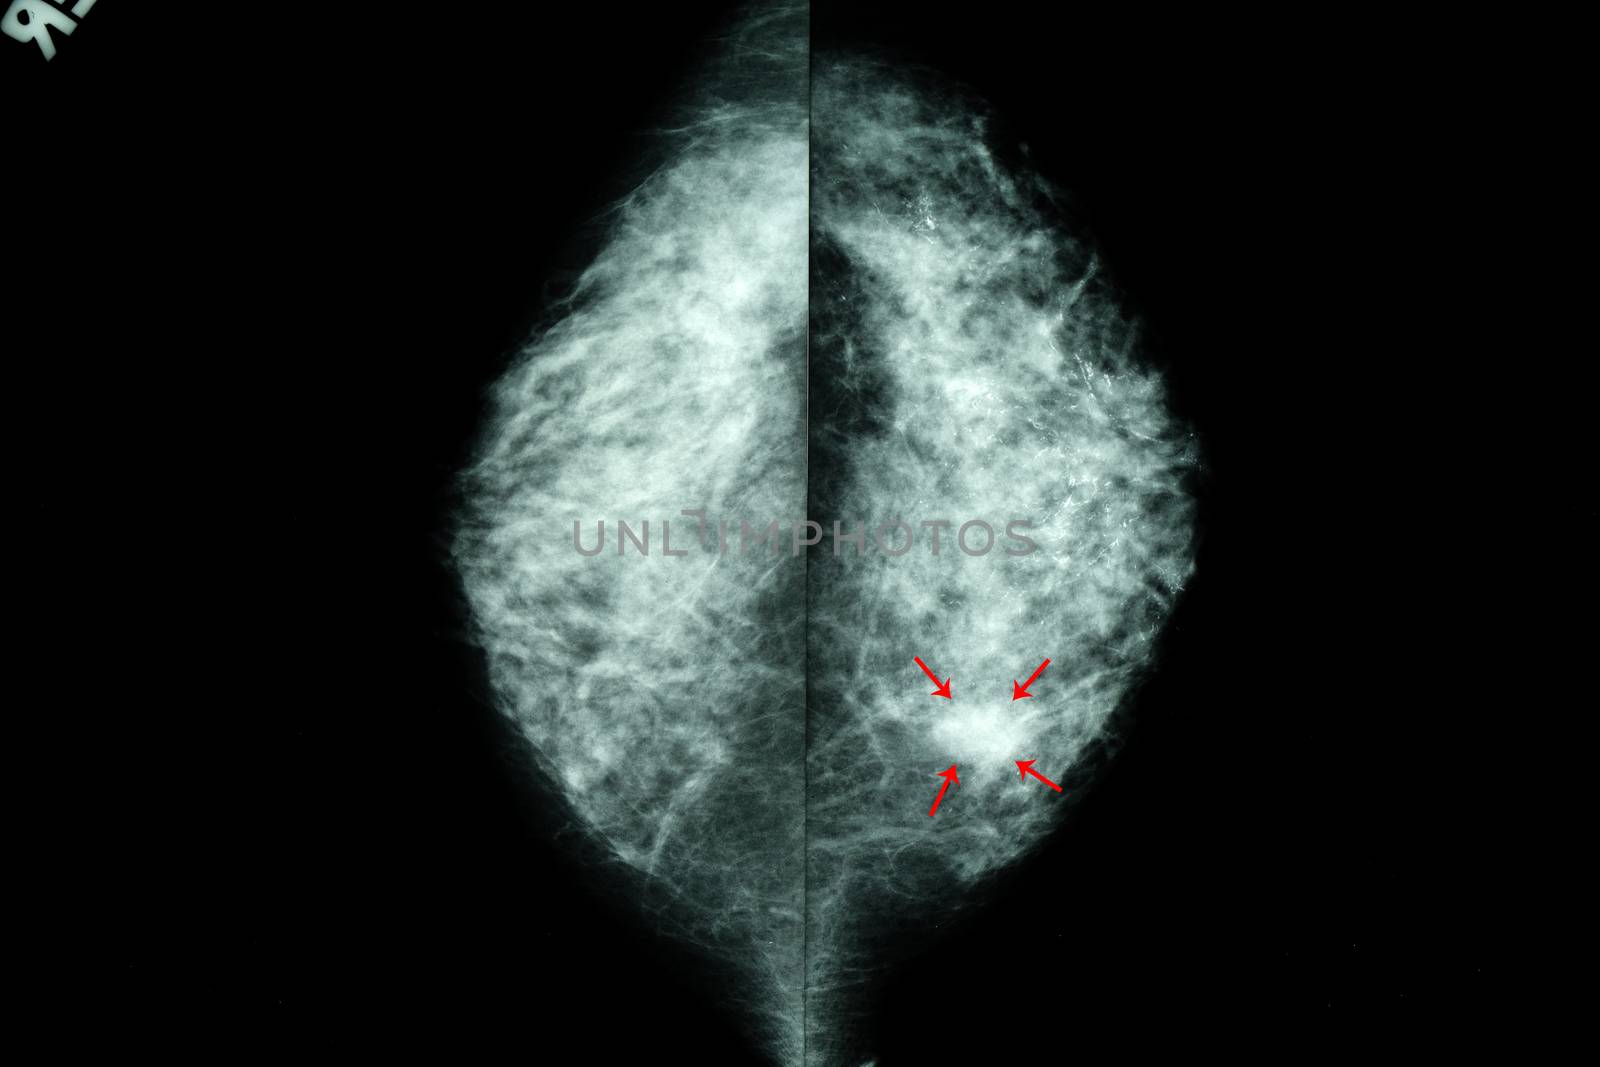 an x-ray image of female breasts or mammogram shing a large nodule with cal calcium deposits in the breast tissue